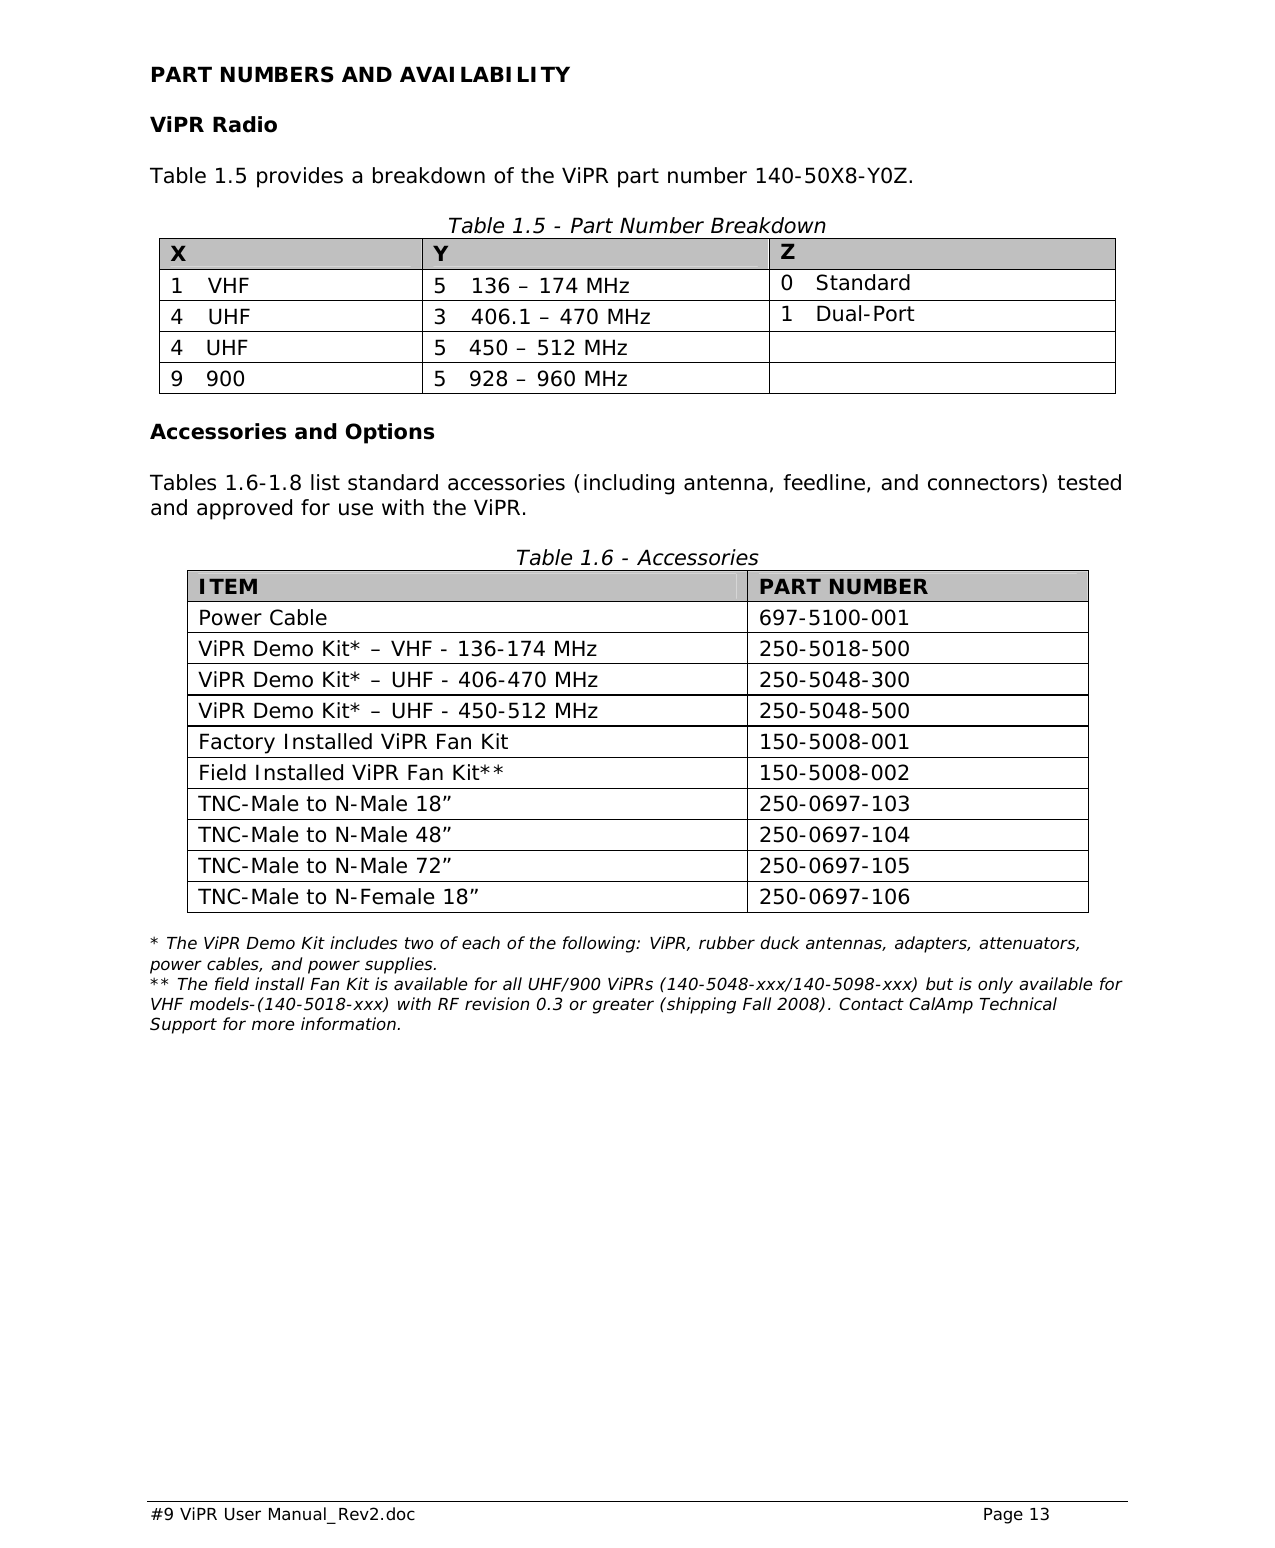  #9 ViPR User Manual_Rev2.doc    Page 13 PART NUMBERS AND AVAILABILITY ViPR Radio Table 1.5 provides a breakdown of the ViPR part number 140-50X8-Y0Z.  Table 1.5 - Part Number Breakdown X  Y  Z 1 VHF  5 136 – 174 MHz  0   Standard 4  UHF  3  406.1 – 470 MHz  1   Dual-Port 4   UHF  5   450 – 512 MHz   9   900  5   928 – 960 MHz   Accessories and Options Tables 1.6-1.8 list standard accessories (including antenna, feedline, and connectors) tested and approved for use with the ViPR. Table 1.6 - Accessories ITEM  PART NUMBER Power Cable  697-5100-001  ViPR Demo Kit* – VHF - 136-174 MHz  250-5018-500 ViPR Demo Kit* – UHF - 406-470 MHz  250-5048-300 ViPR Demo Kit* – UHF - 450-512 MHz  250-5048-500 Factory Installed ViPR Fan Kit  150-5008-001 Field Installed ViPR Fan Kit**  150-5008-002 TNC-Male to N-Male 18”  250-0697-103 TNC-Male to N-Male 48”  250-0697-104 TNC-Male to N-Male 72”  250-0697-105 TNC-Male to N-Female 18”  250-0697-106  * The ViPR Demo Kit includes two of each of the following: ViPR, rubber duck antennas, adapters, attenuators, power cables, and power supplies. ** The field install Fan Kit is available for all UHF/900 ViPRs (140-5048-xxx/140-5098-xxx) but is only available for VHF models-(140-5018-xxx) with RF revision 0.3 or greater (shipping Fall 2008). Contact CalAmp Technical Support for more information.  